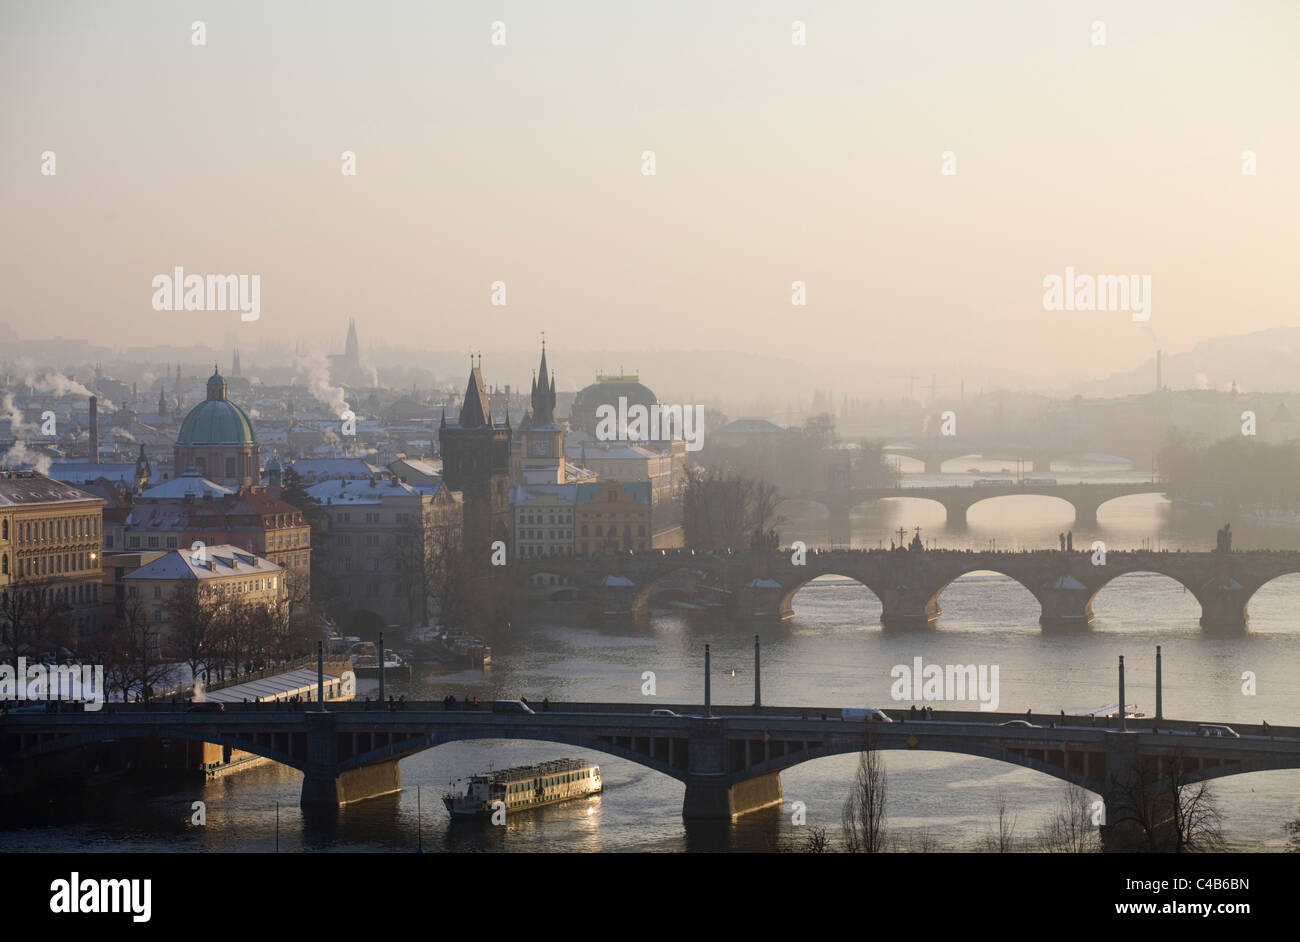 Czech Republic, Prague, Europe; A street sign with the name of the place Stock Photo